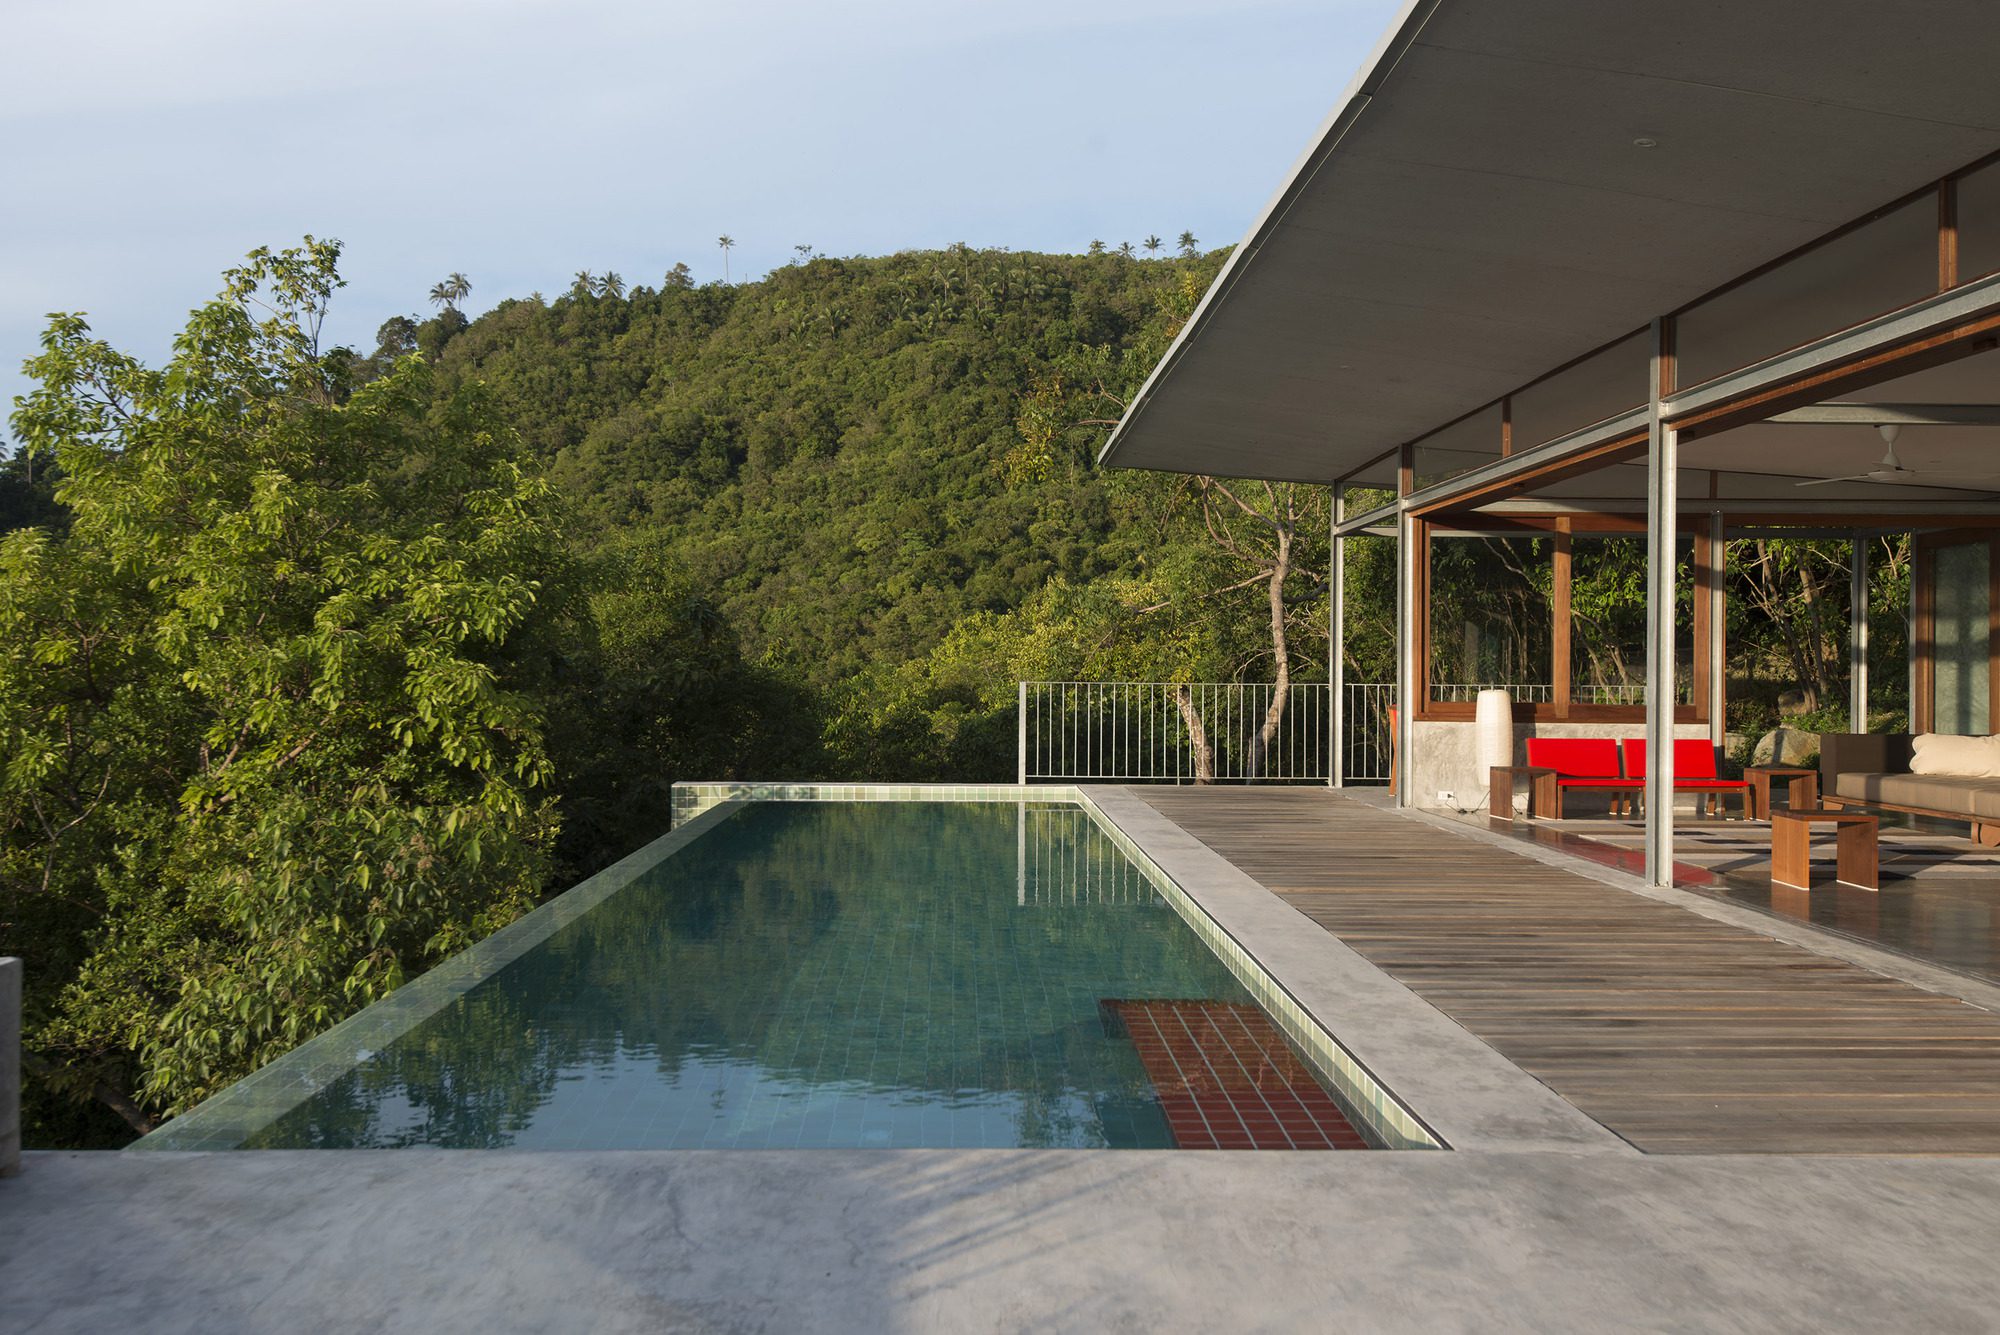 Stunning Views In Thailand The Naked House Icreatived